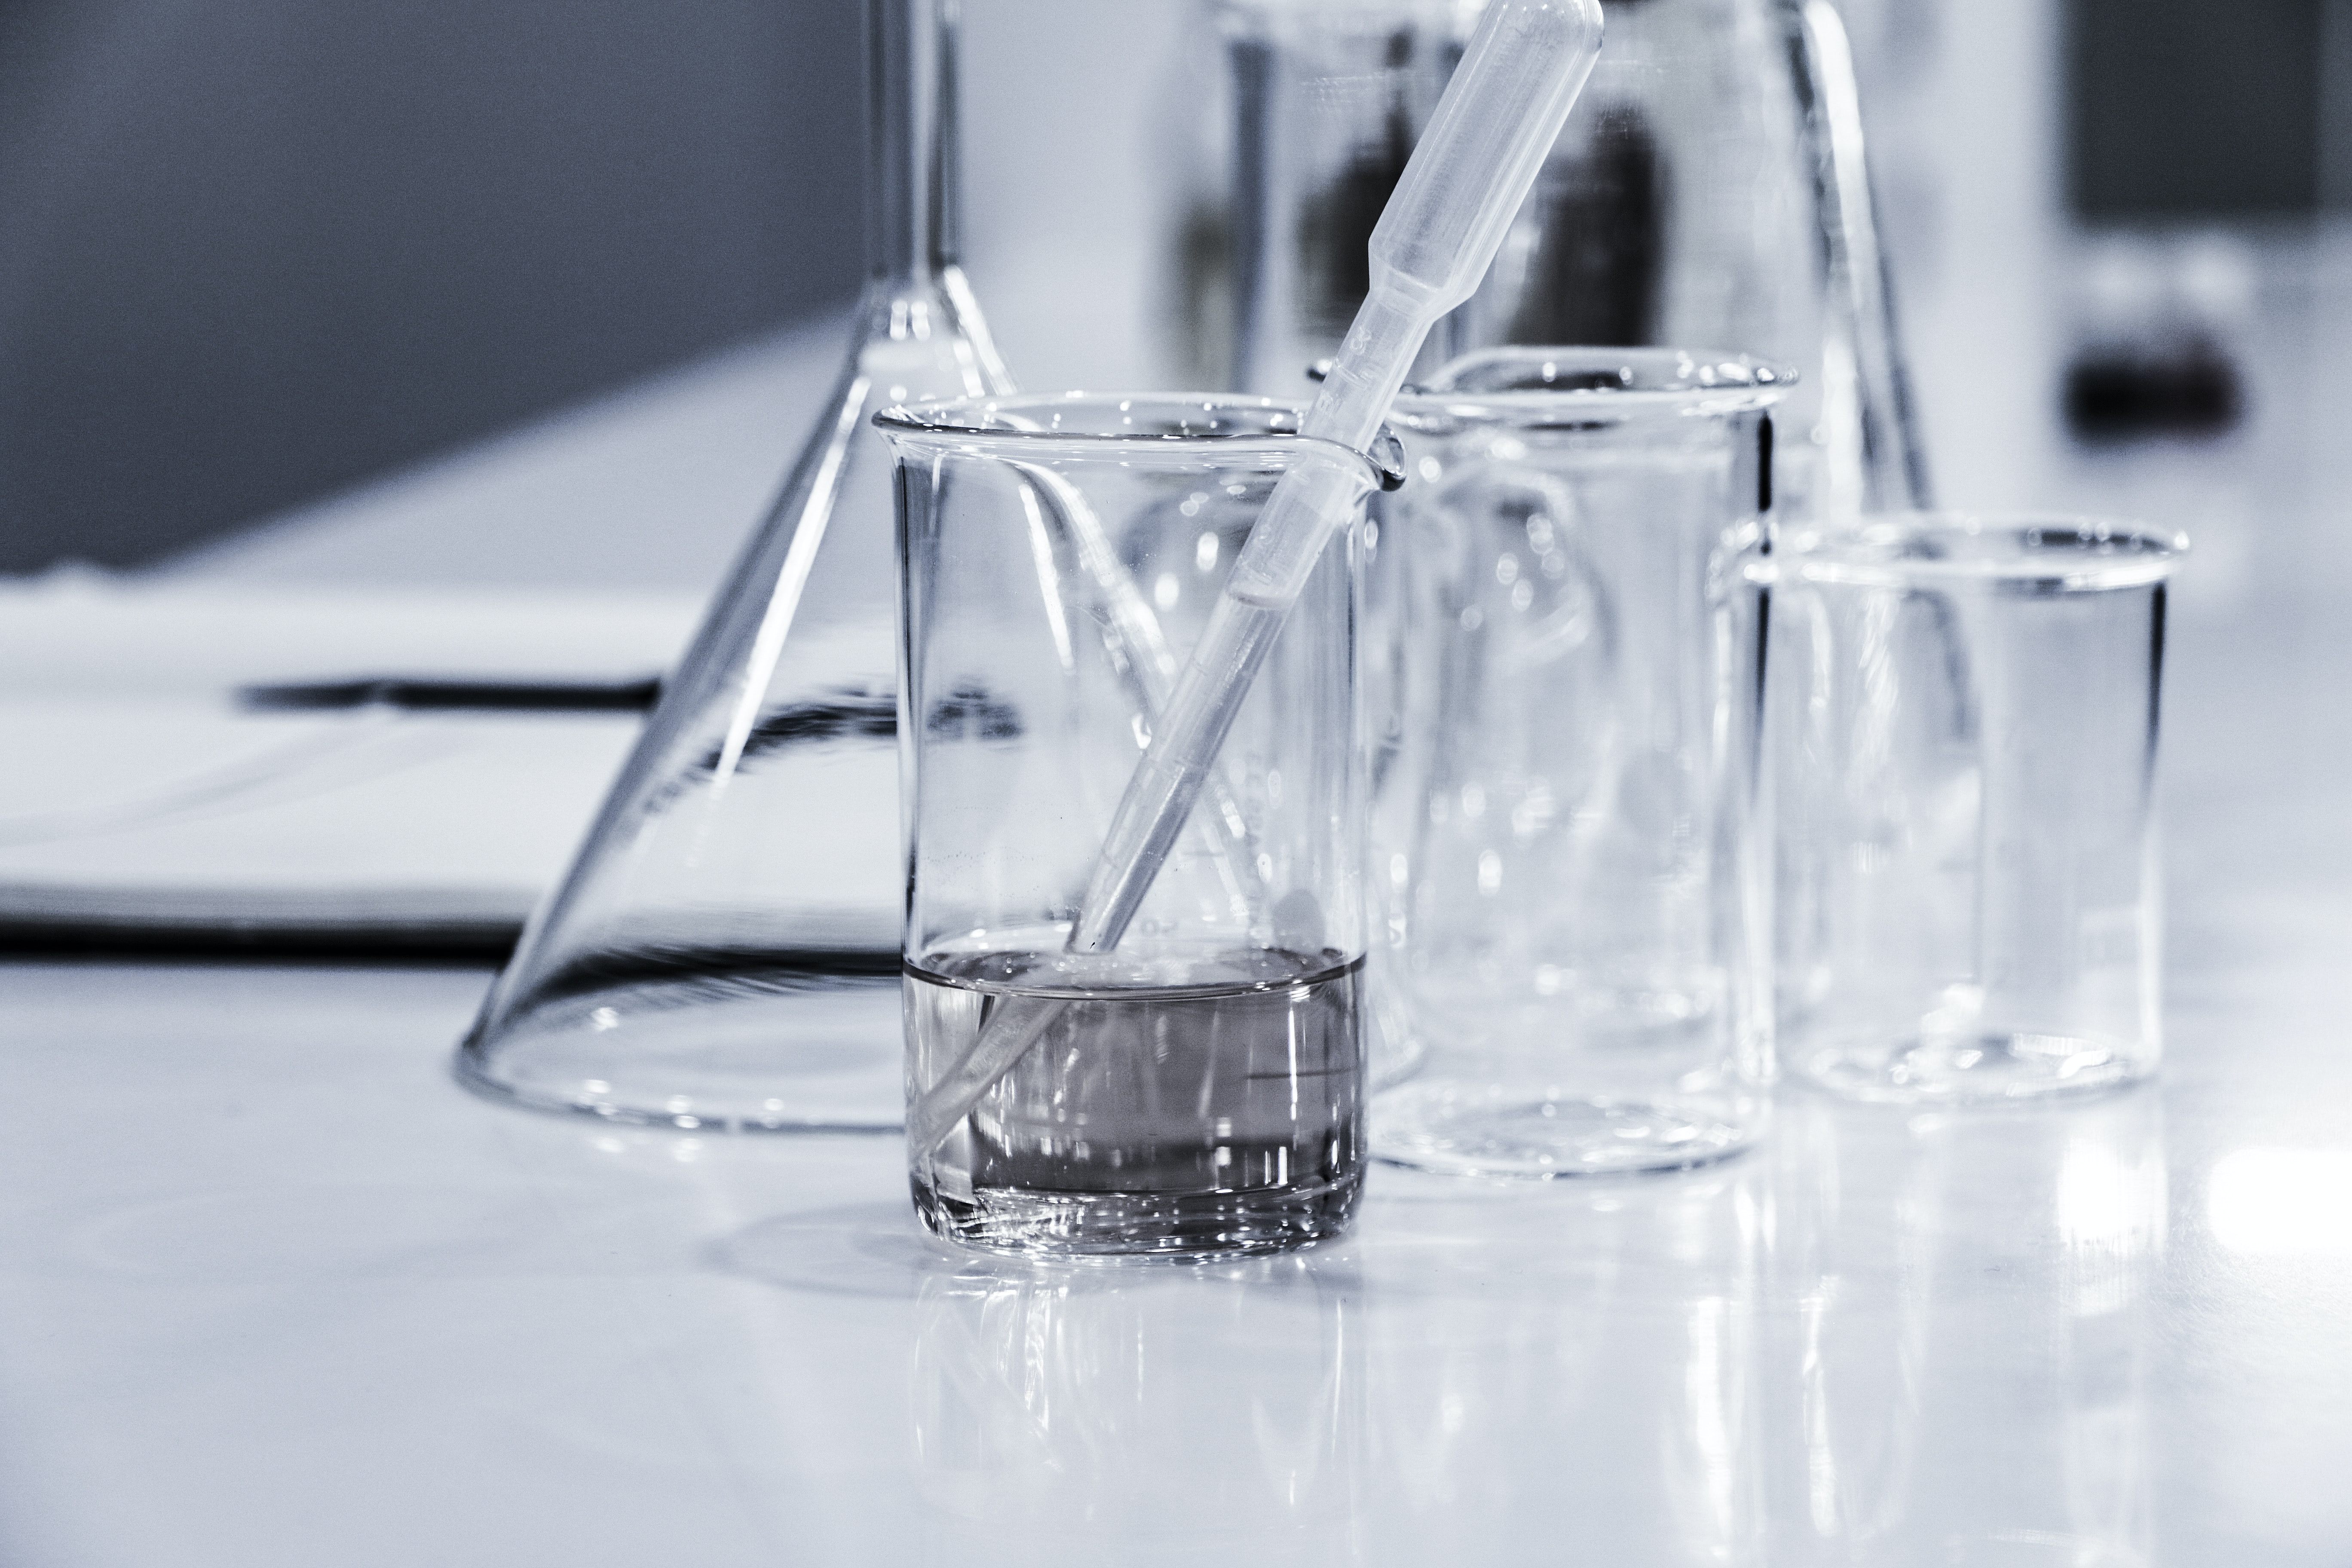   glass beakers with a pipette from unsplash.com